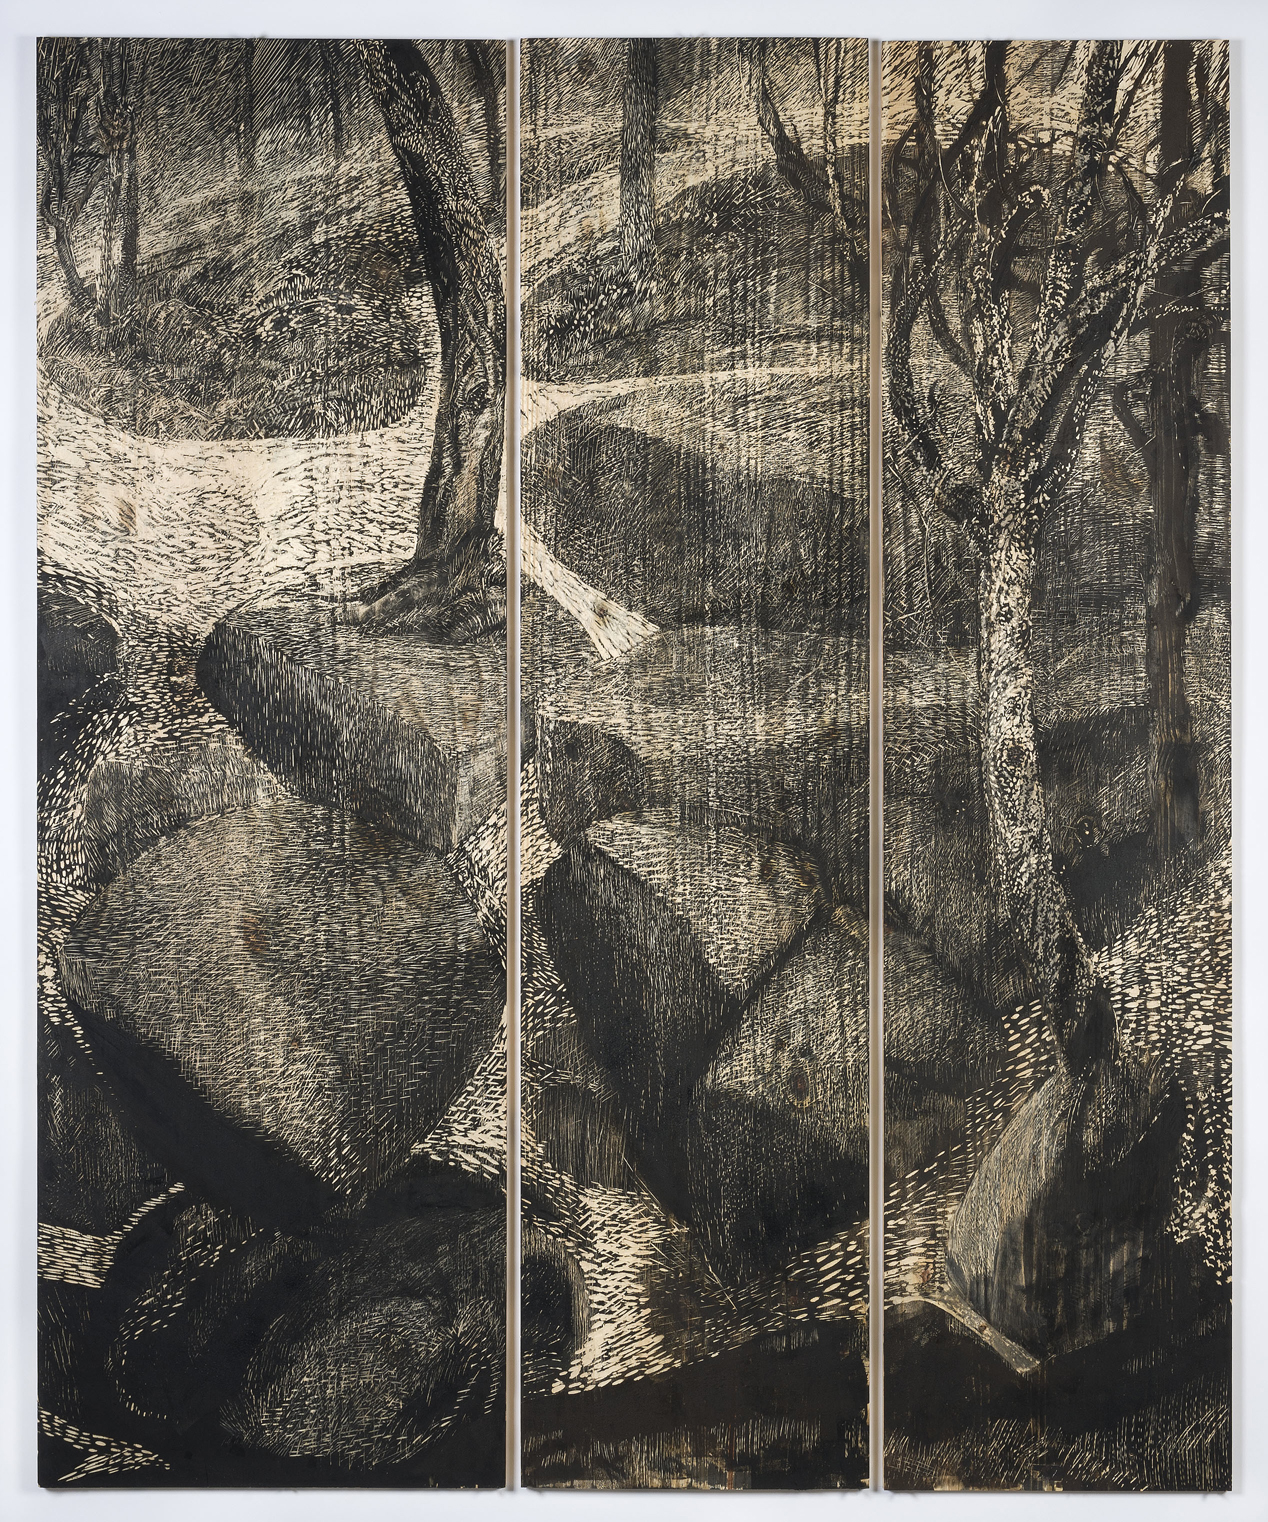   Midnight Glory , 2012, inked and carved wood panels, 74 x 60 inches 